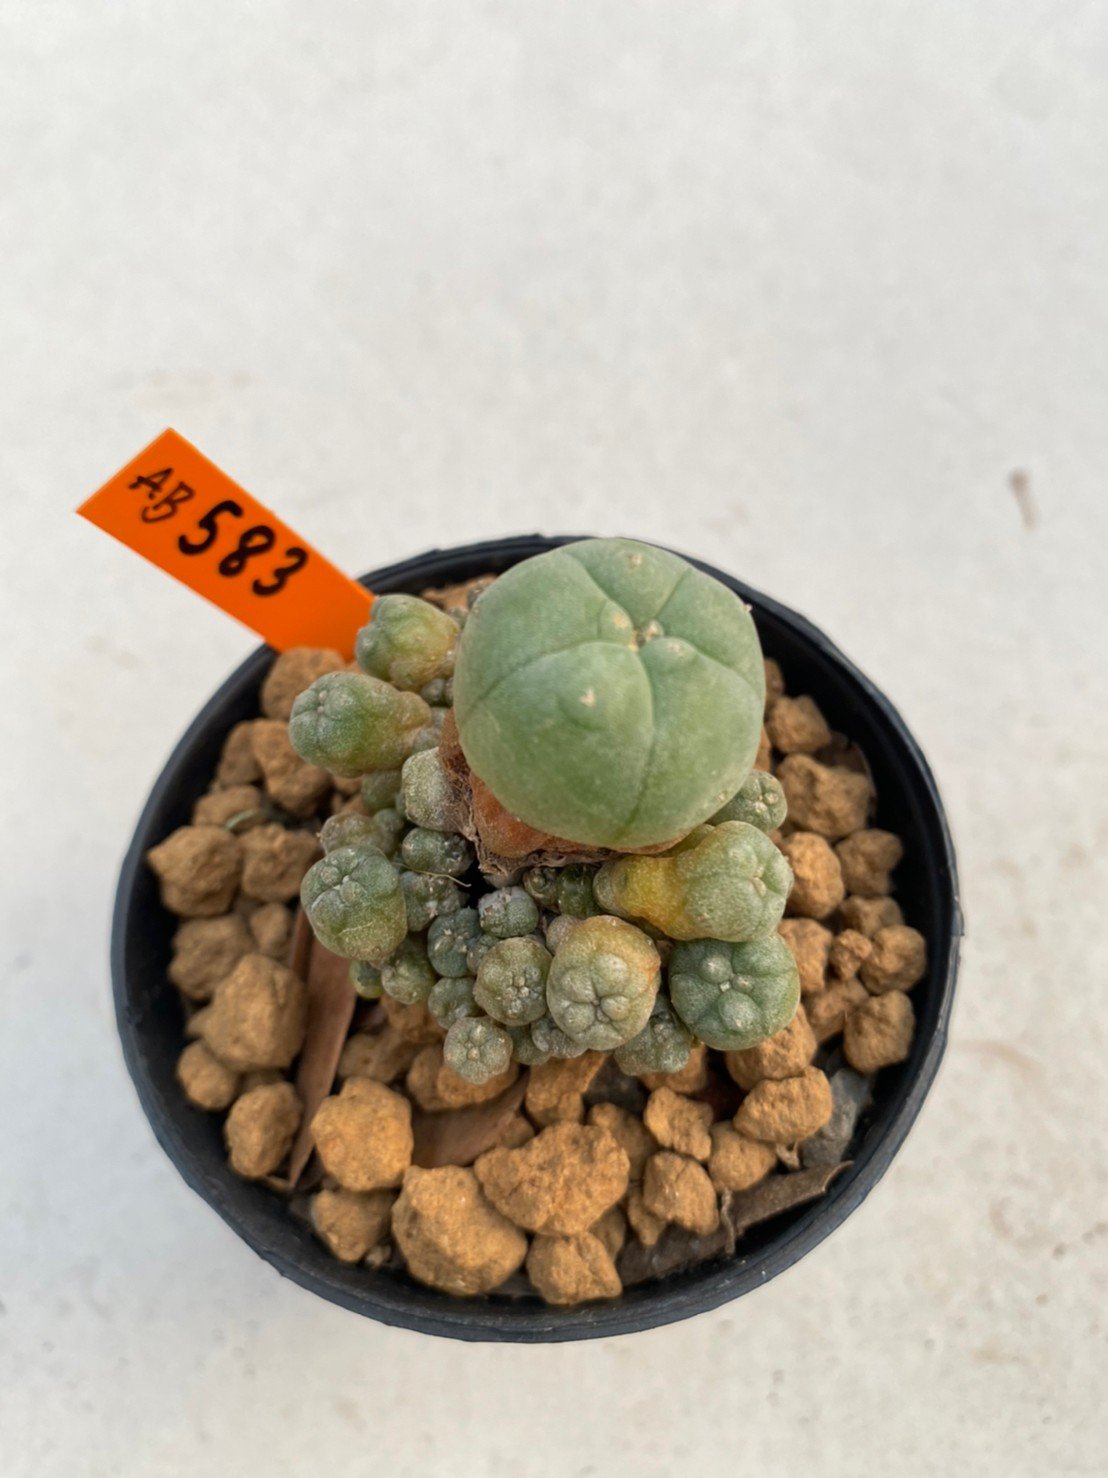 Lophophora Williamsii 5-6 cm 10 years old ownroot from seed flowering